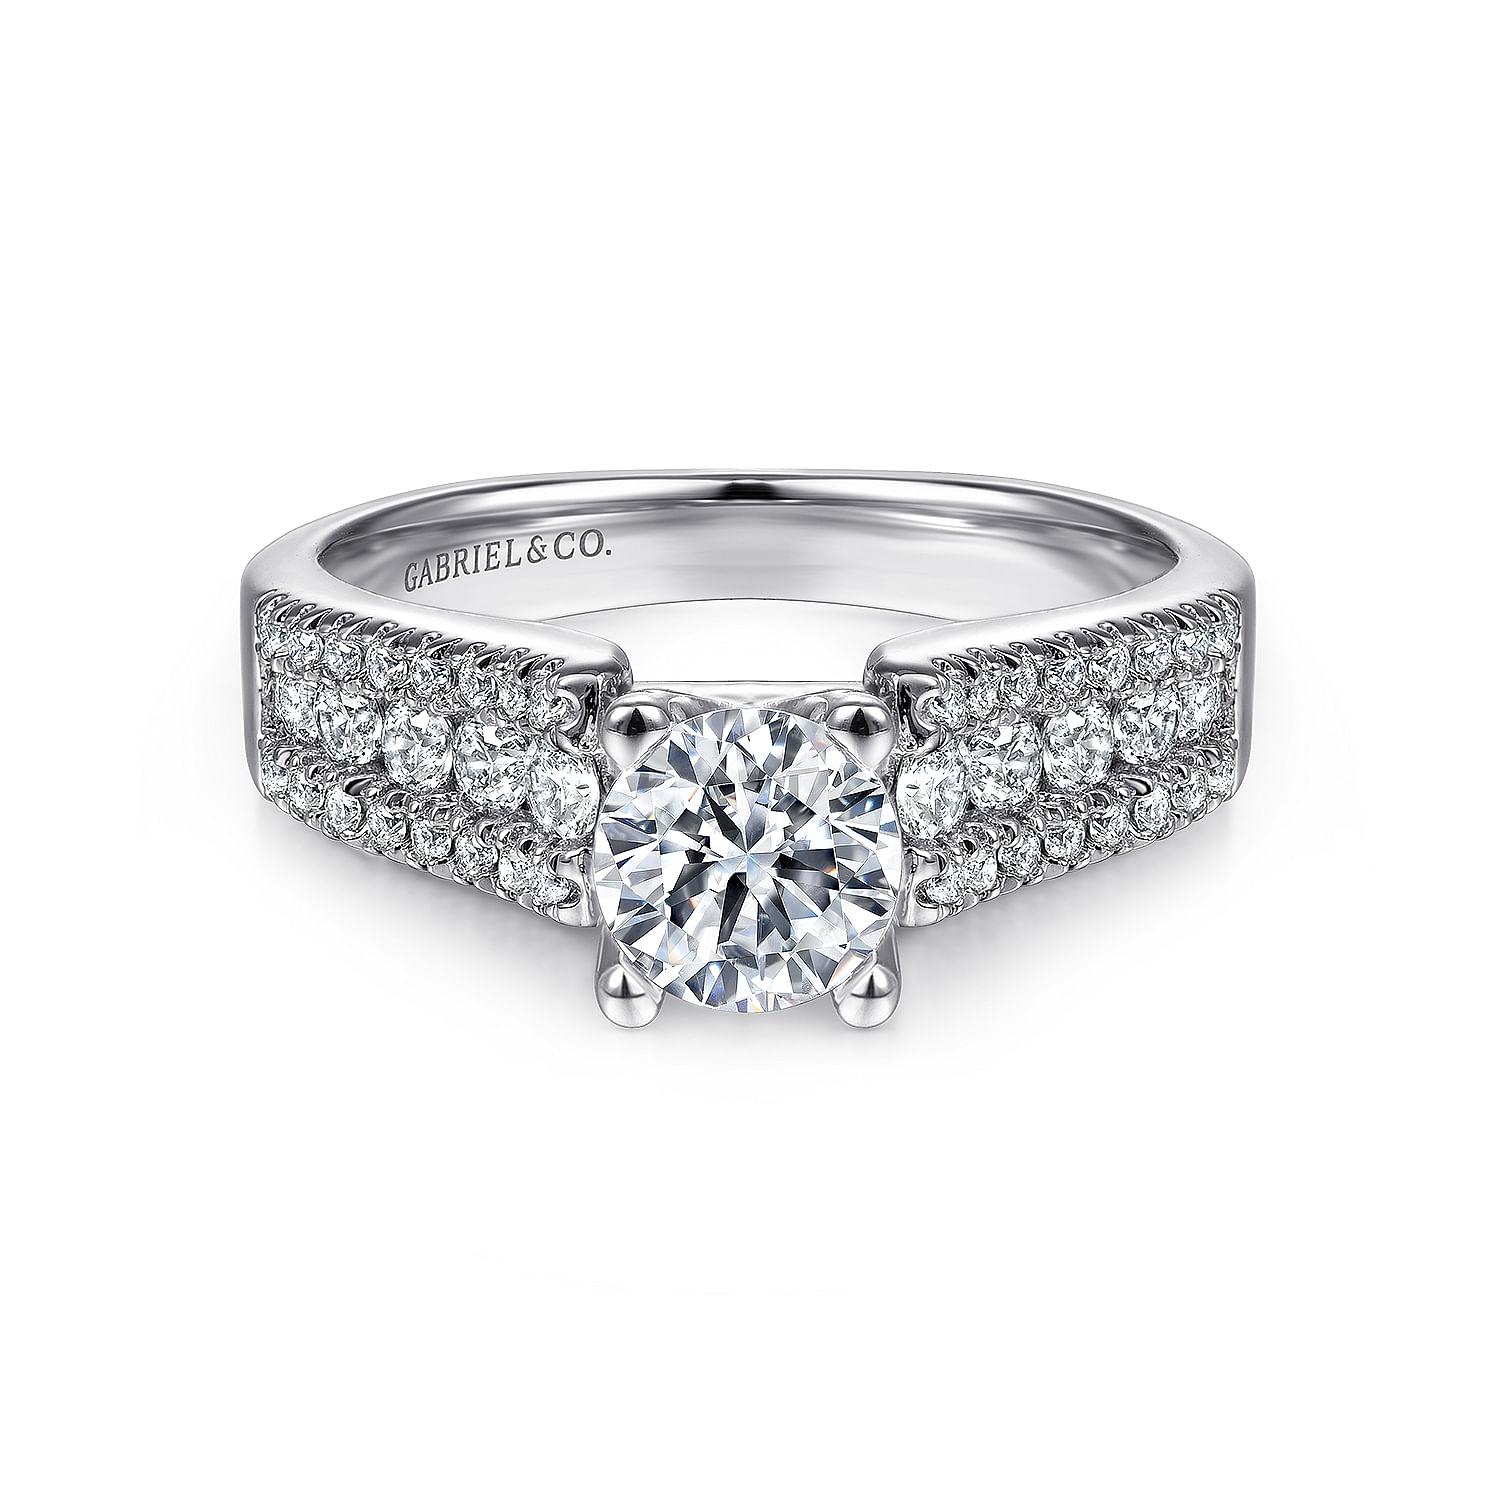 Channing - 14K White Gold Round Wide Band Diamond Engagement Ring